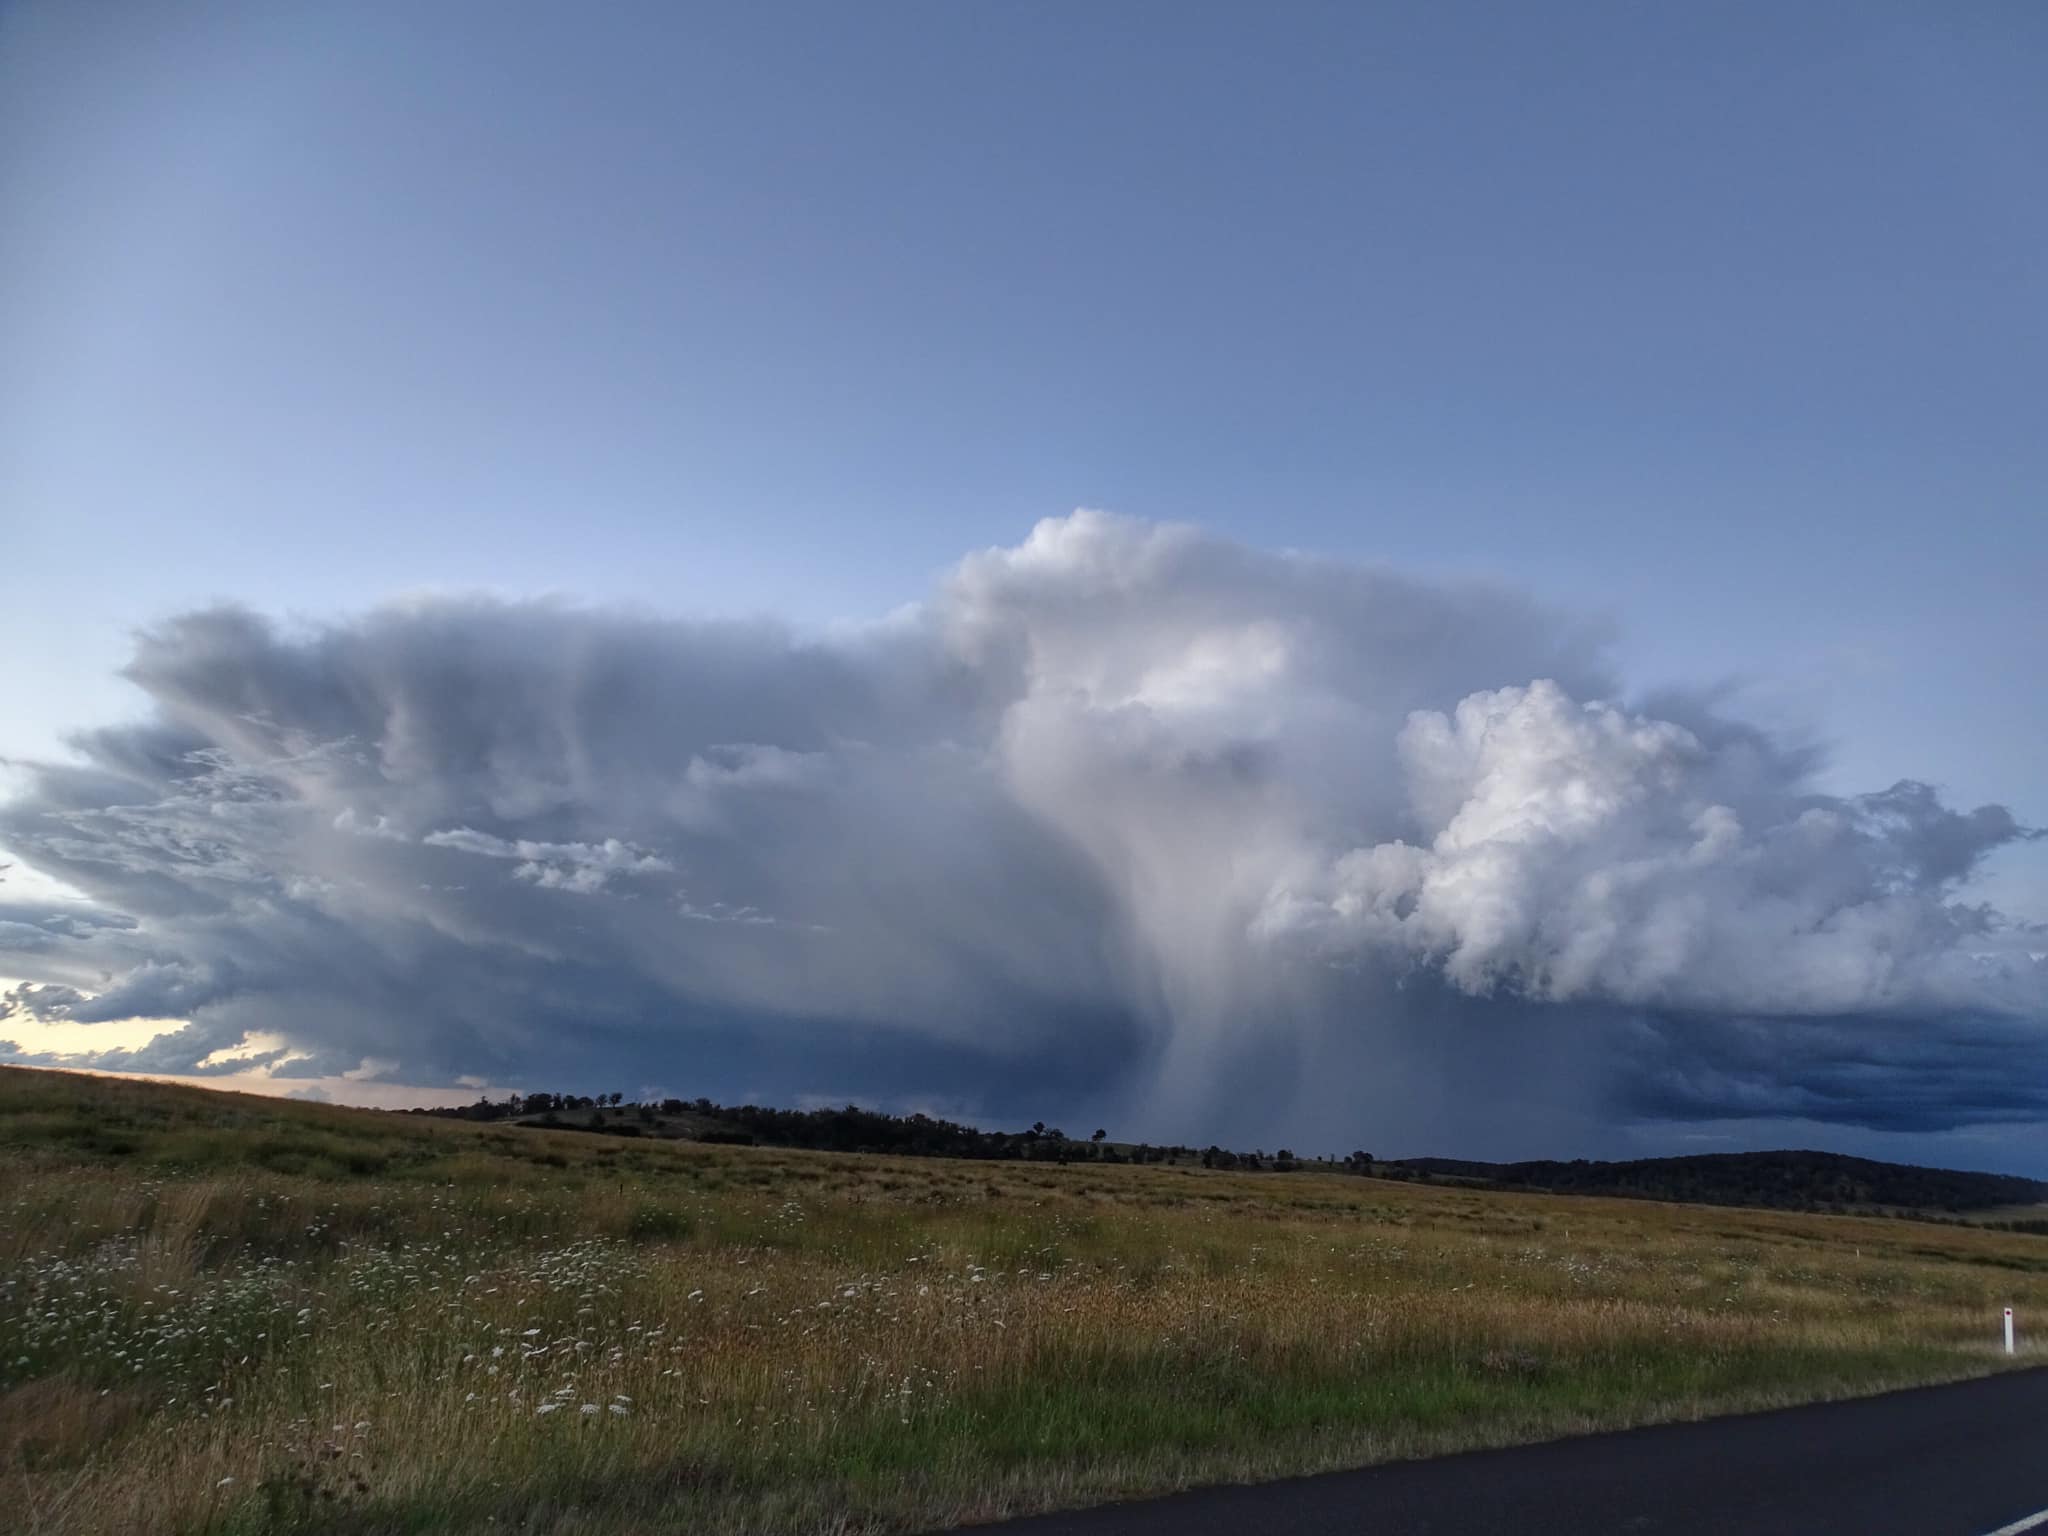 Hi all,, spent the last two days chasing the far north of n.s.w with Jimmy Deguara,, scored this beautiful storm in the northern tablelands at Walcha ...